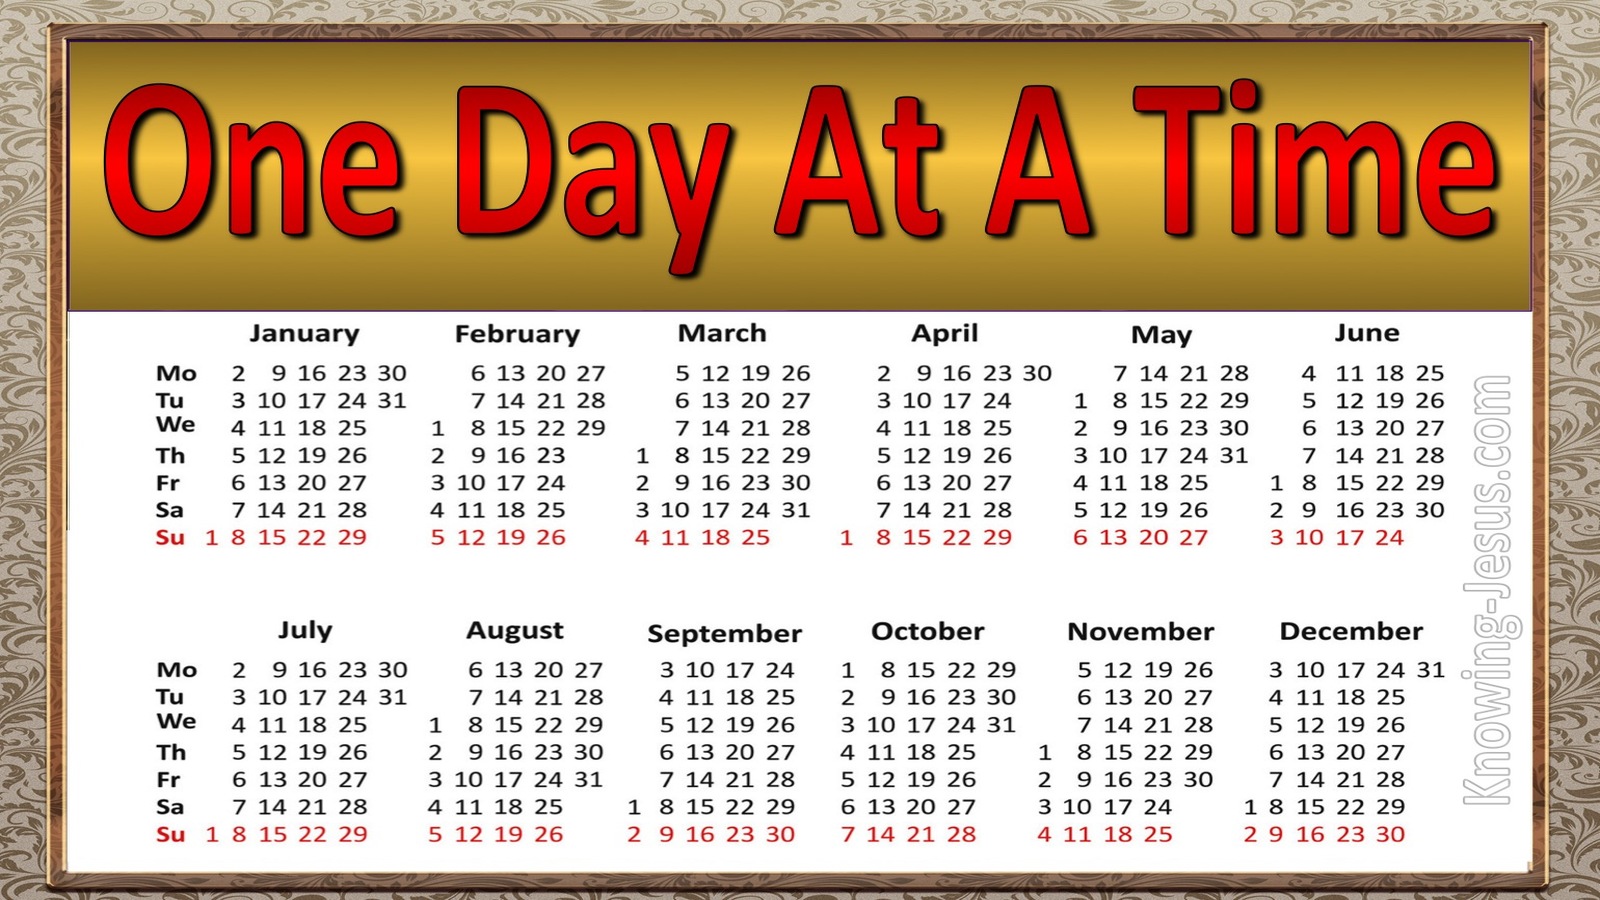 One Day At A Time (devotional)04-27 (red)